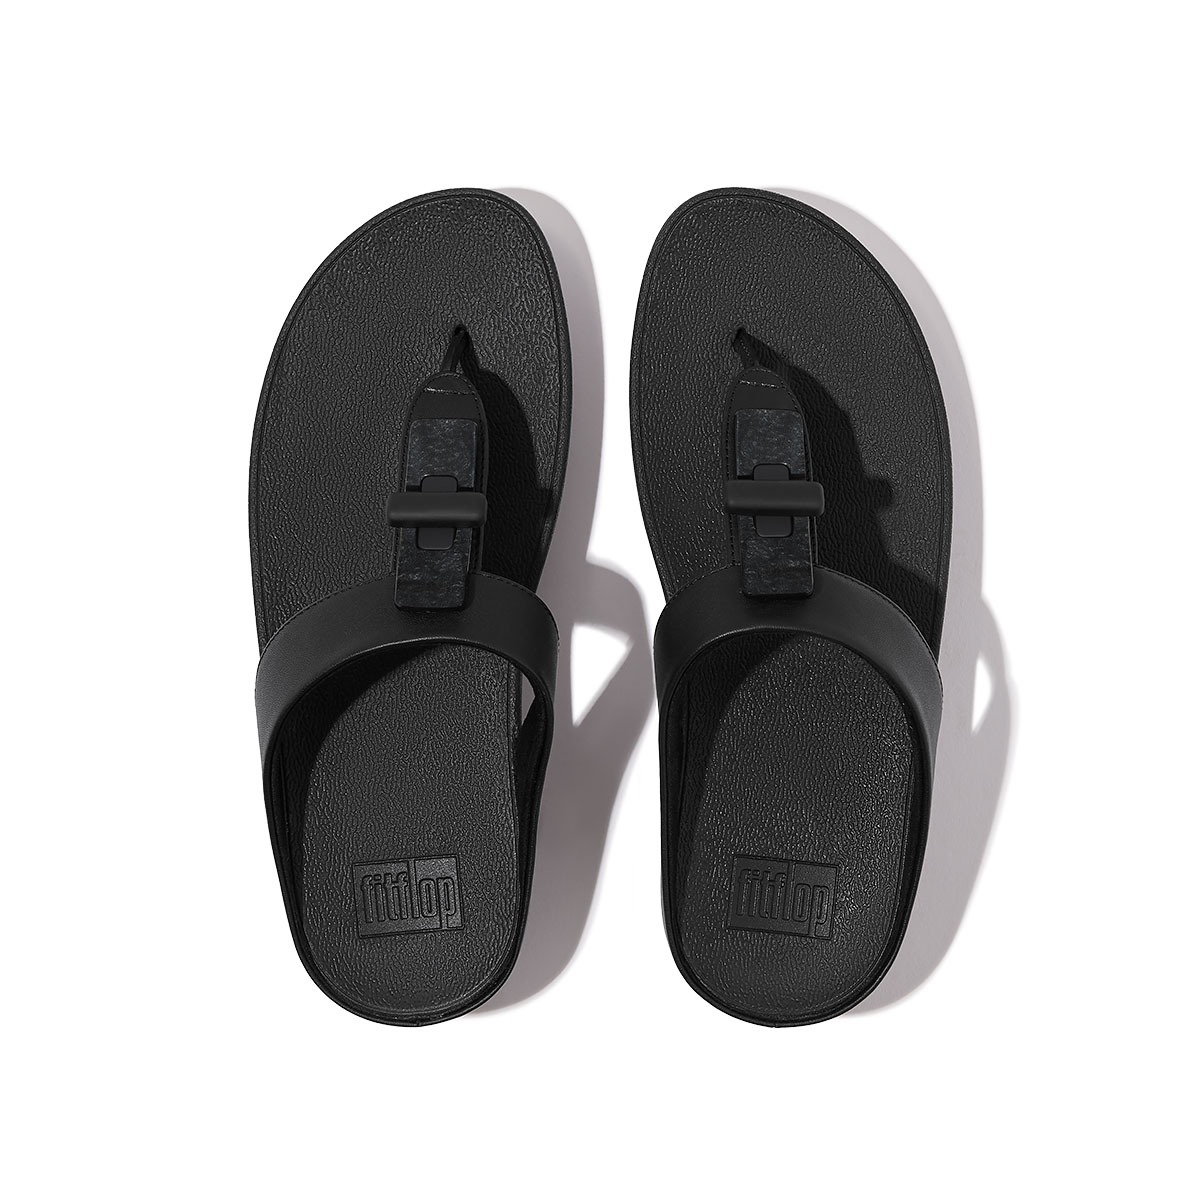 Fino Resin-Lock Leather Toe-Post Sandals Black (GQ1-001) | FitFlop Malaysia